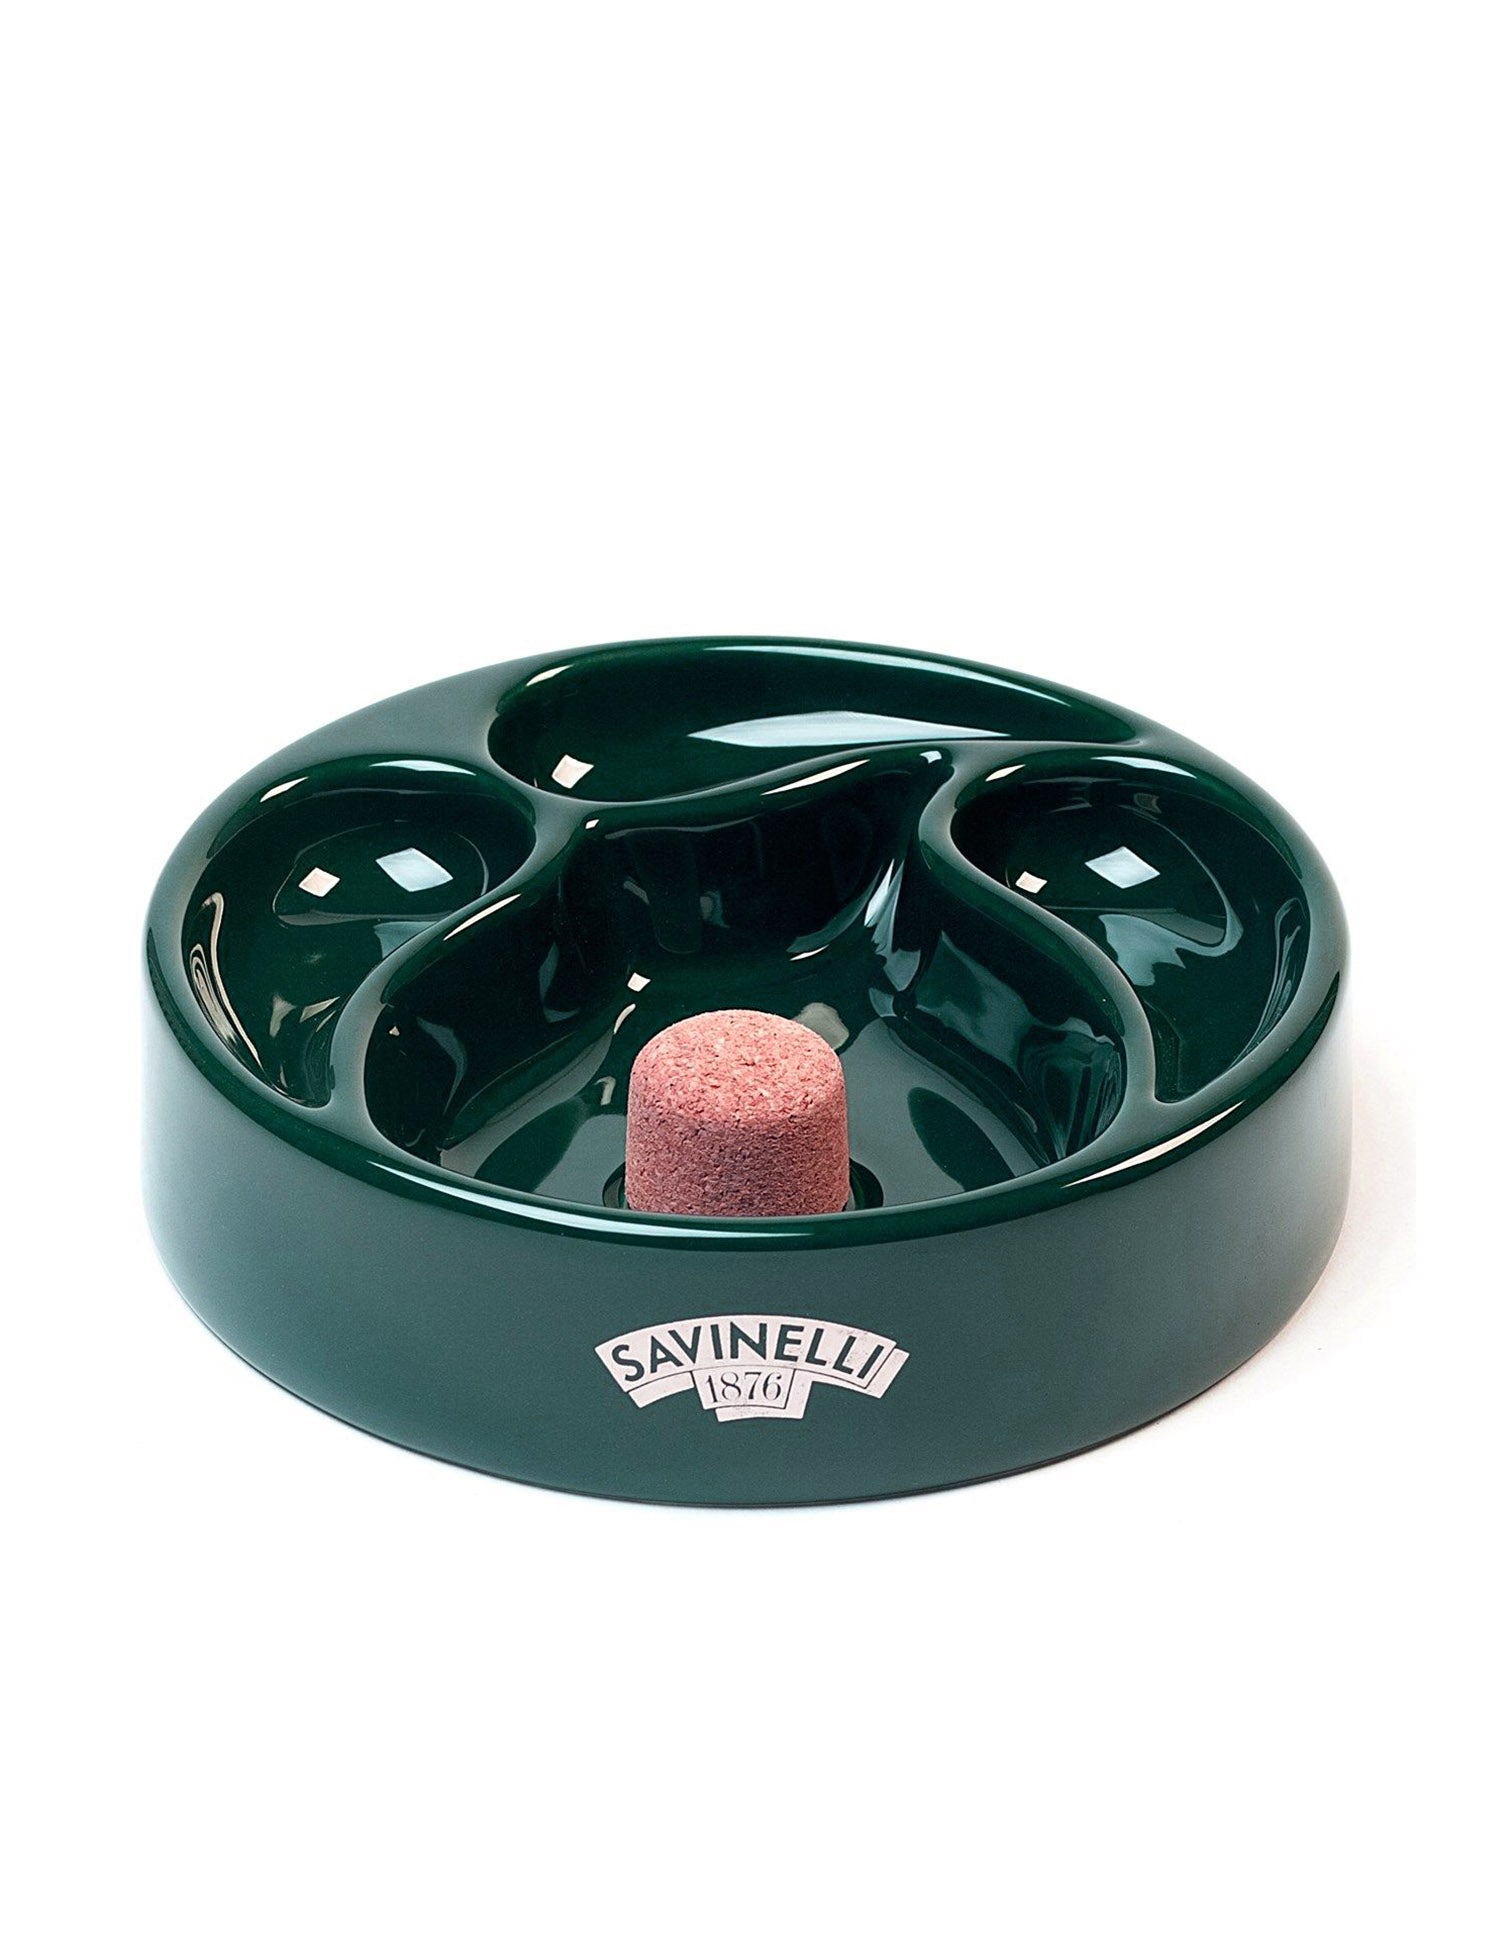 Savinelli Pipe Ashtray with 3-Pipe Stands (Green)